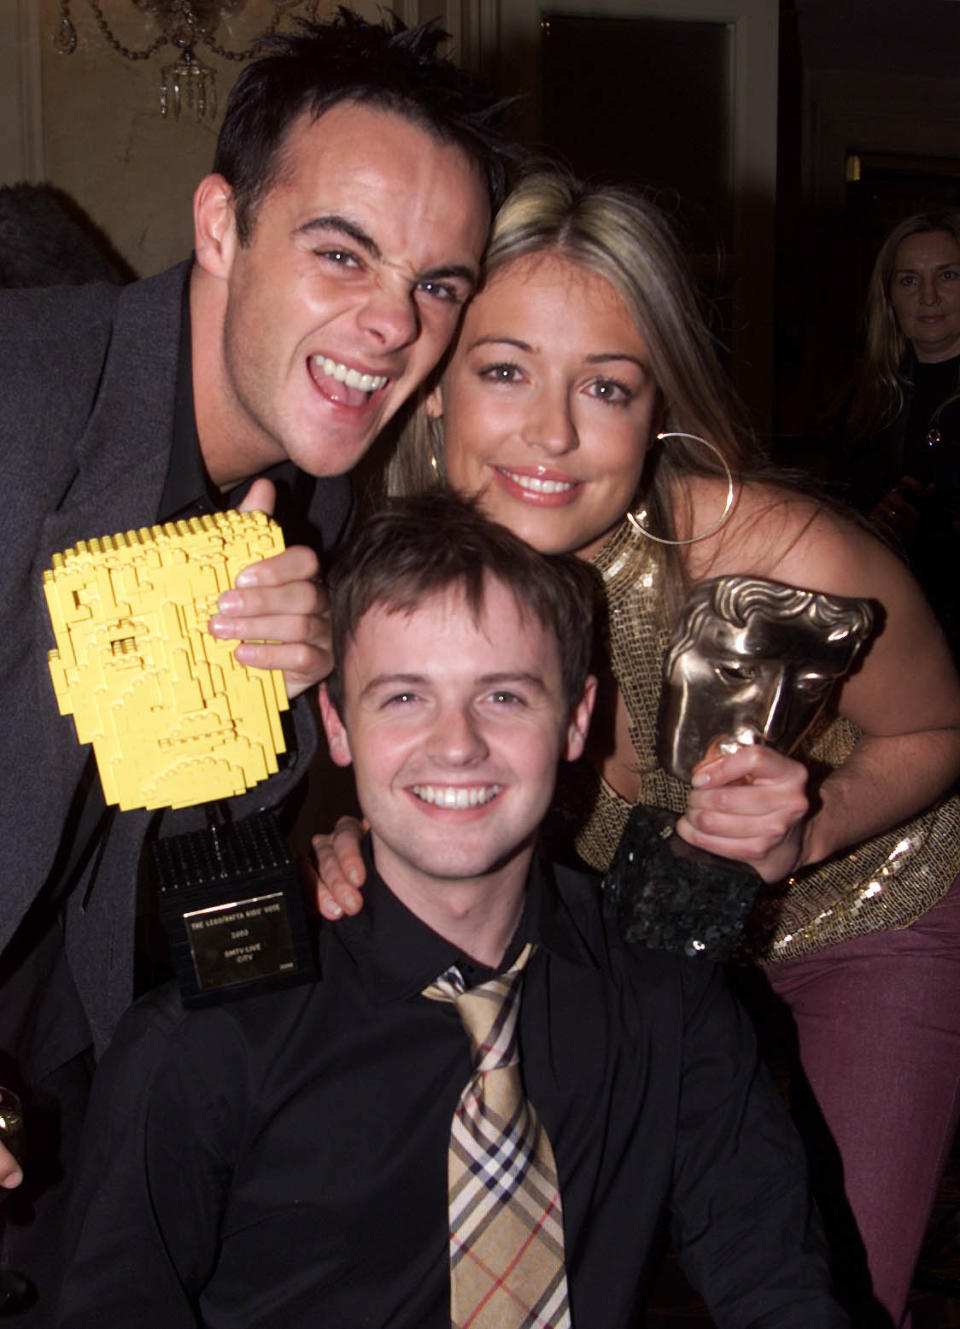 TV presenters Ant and Dec (Ant McPartlin (L) and Declan Donnelly (C)) and Cat Deeley (R) at the British Academy Children's Film & Television Awards at the Park Lane Hilton, London on 24 November, 2002. SM:TV won Best Entertainment Award and the Lego Kid's Vote award. (Photo by Gareth Davies/Getty Images)